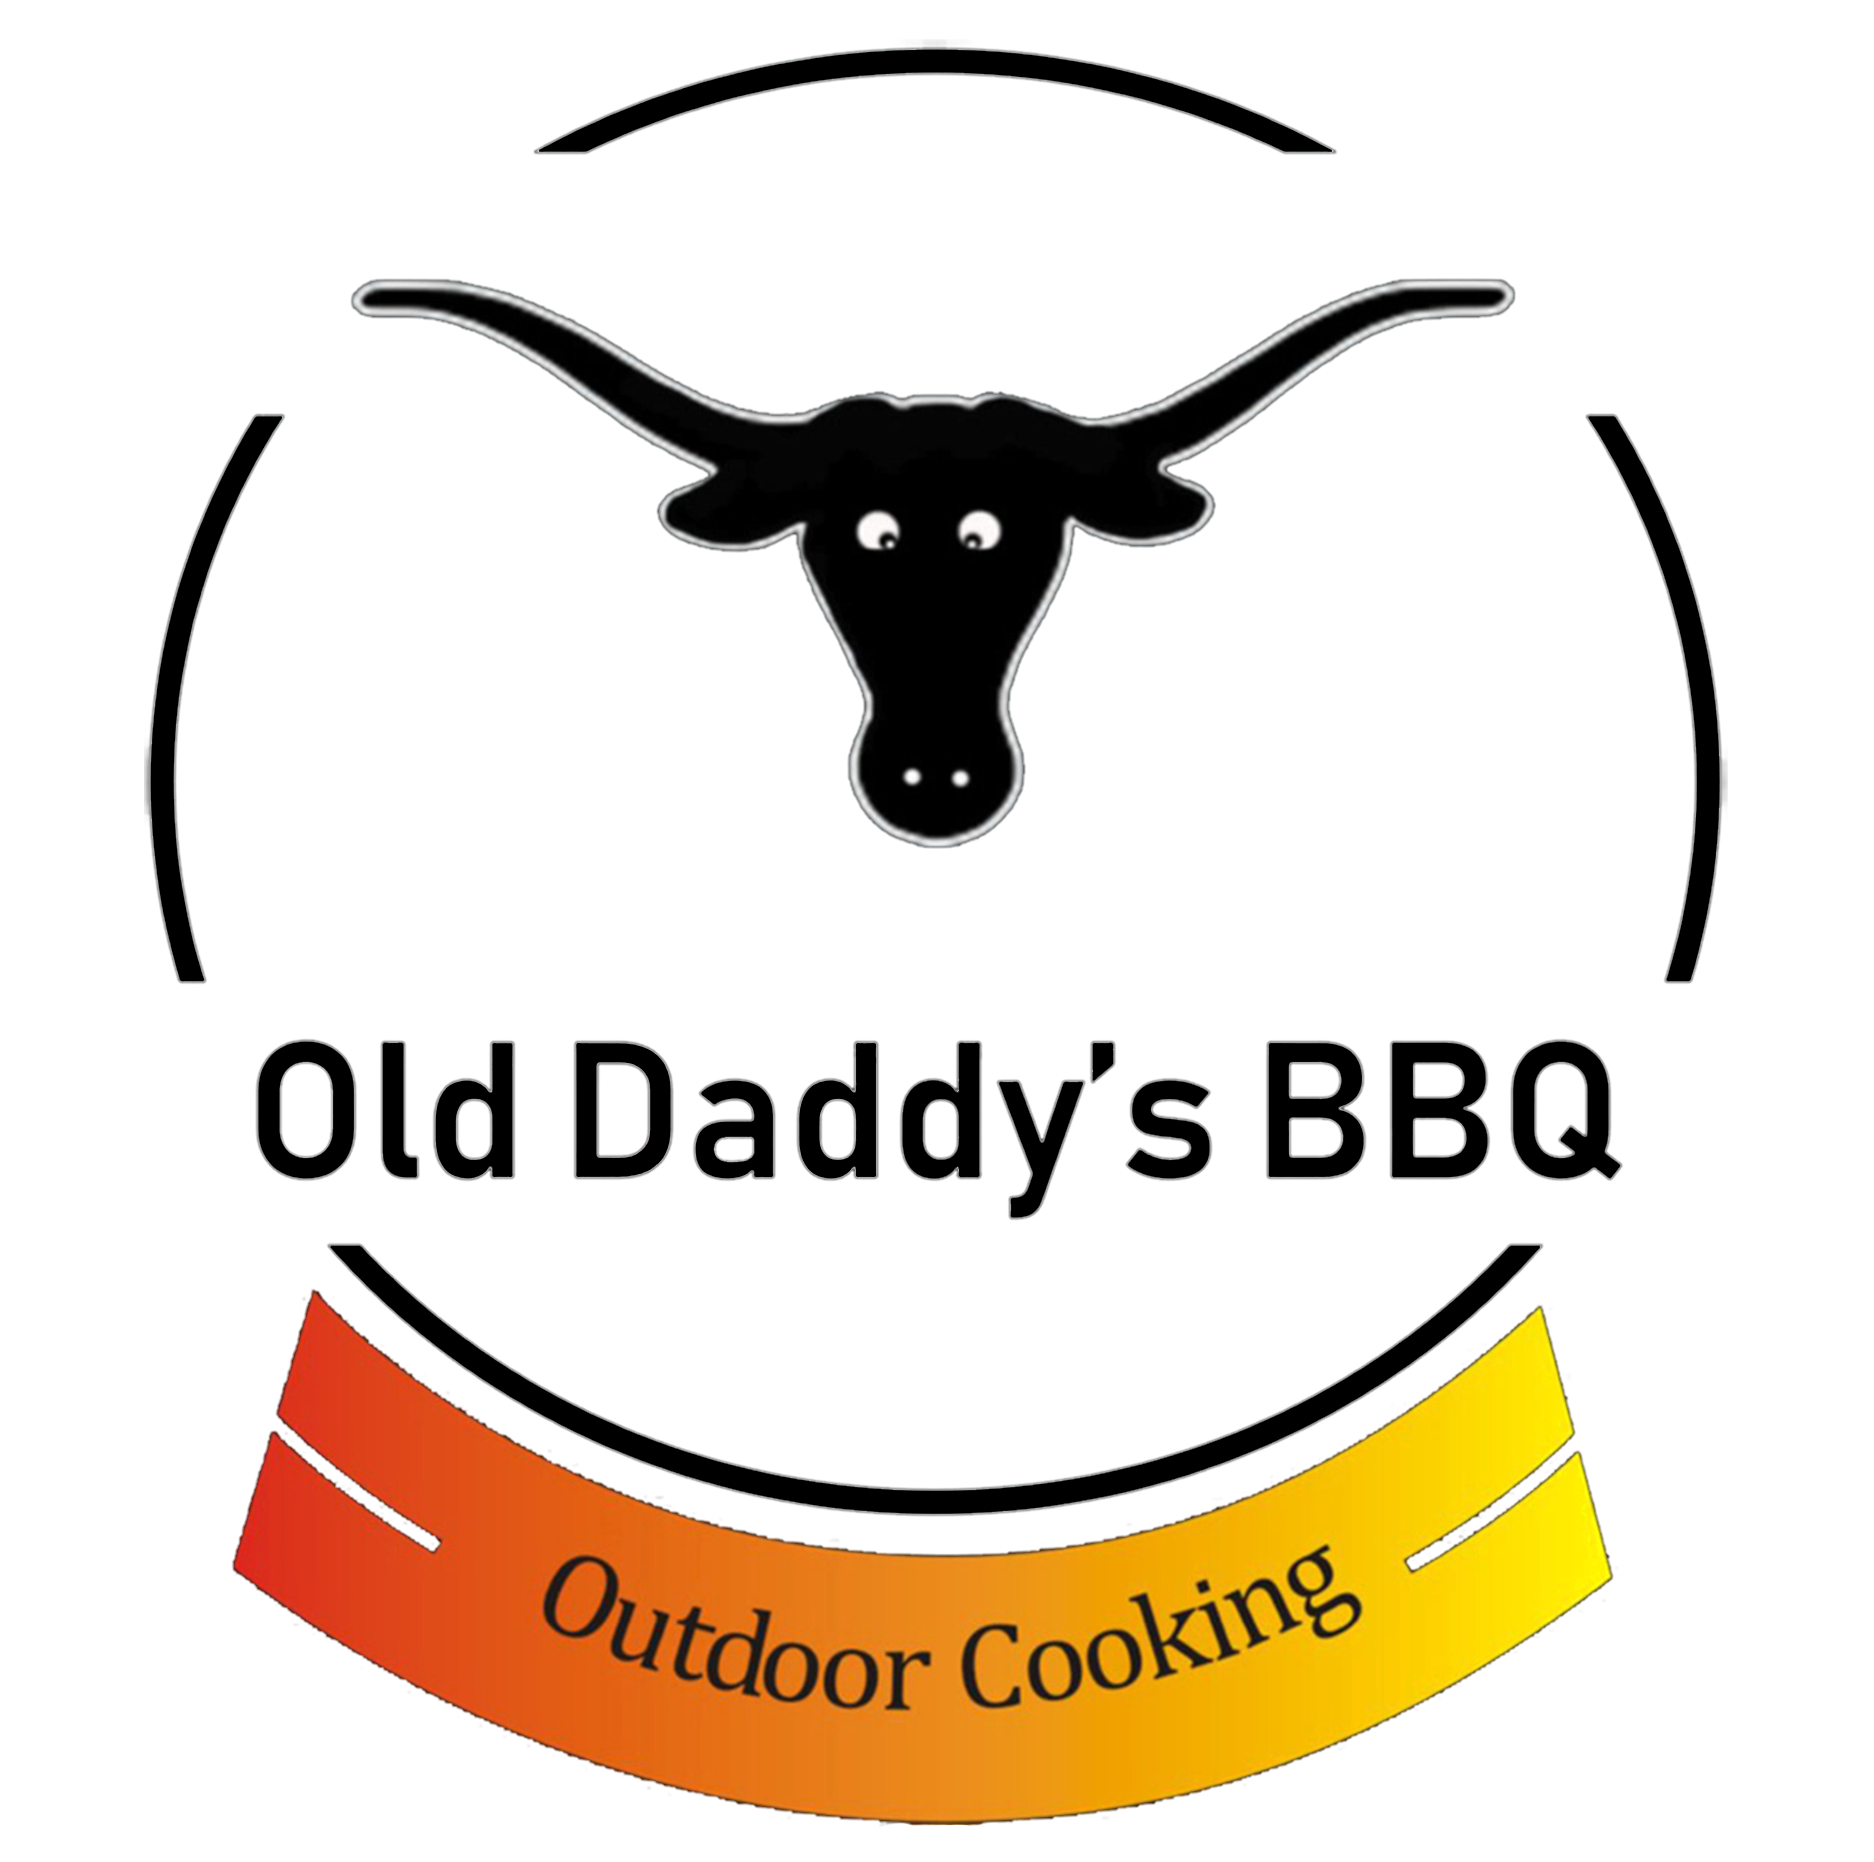 Old Daddy's BBQ